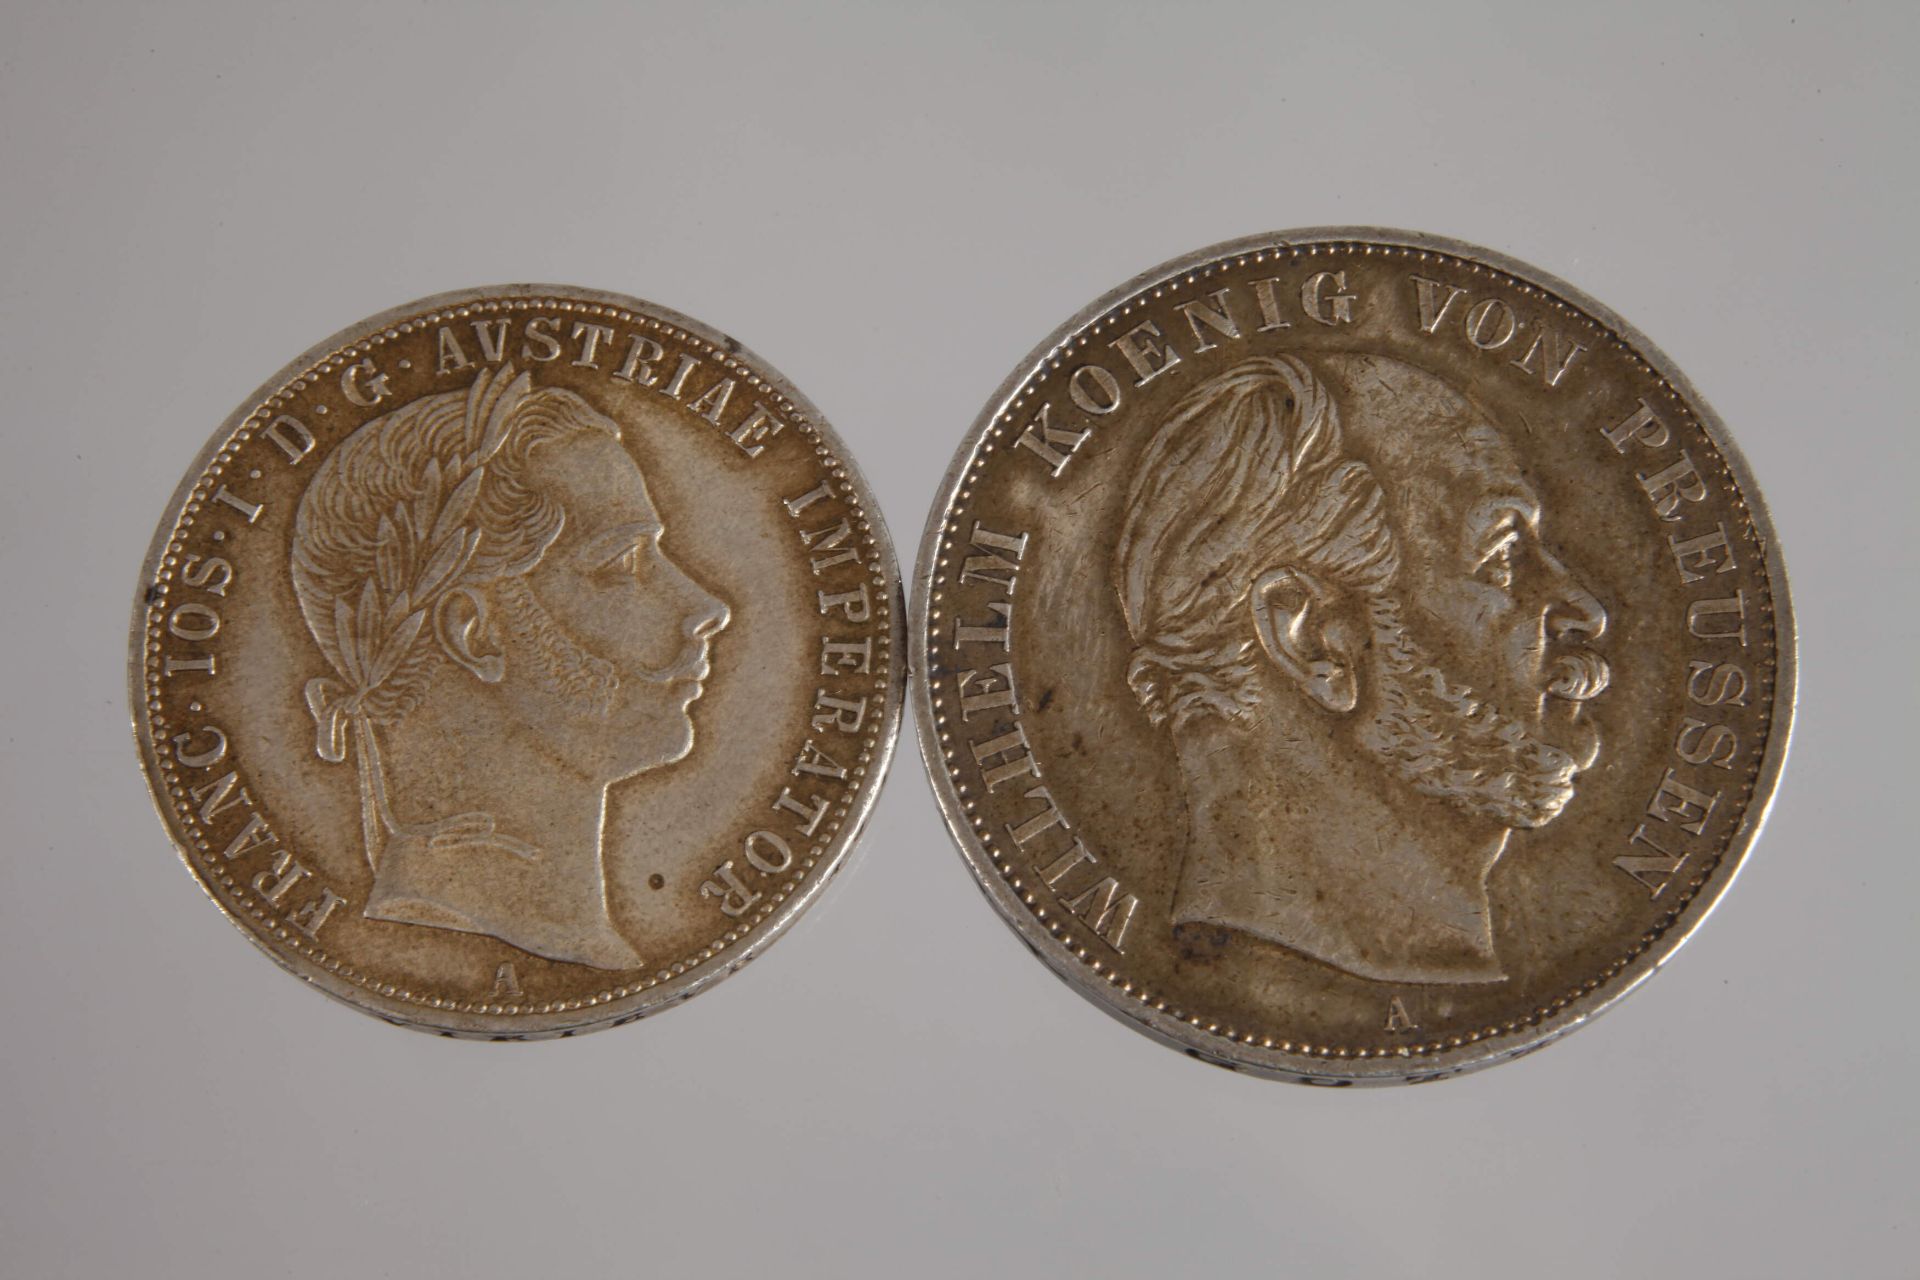 Two silver coins, Prussia and Austria - Image 2 of 3